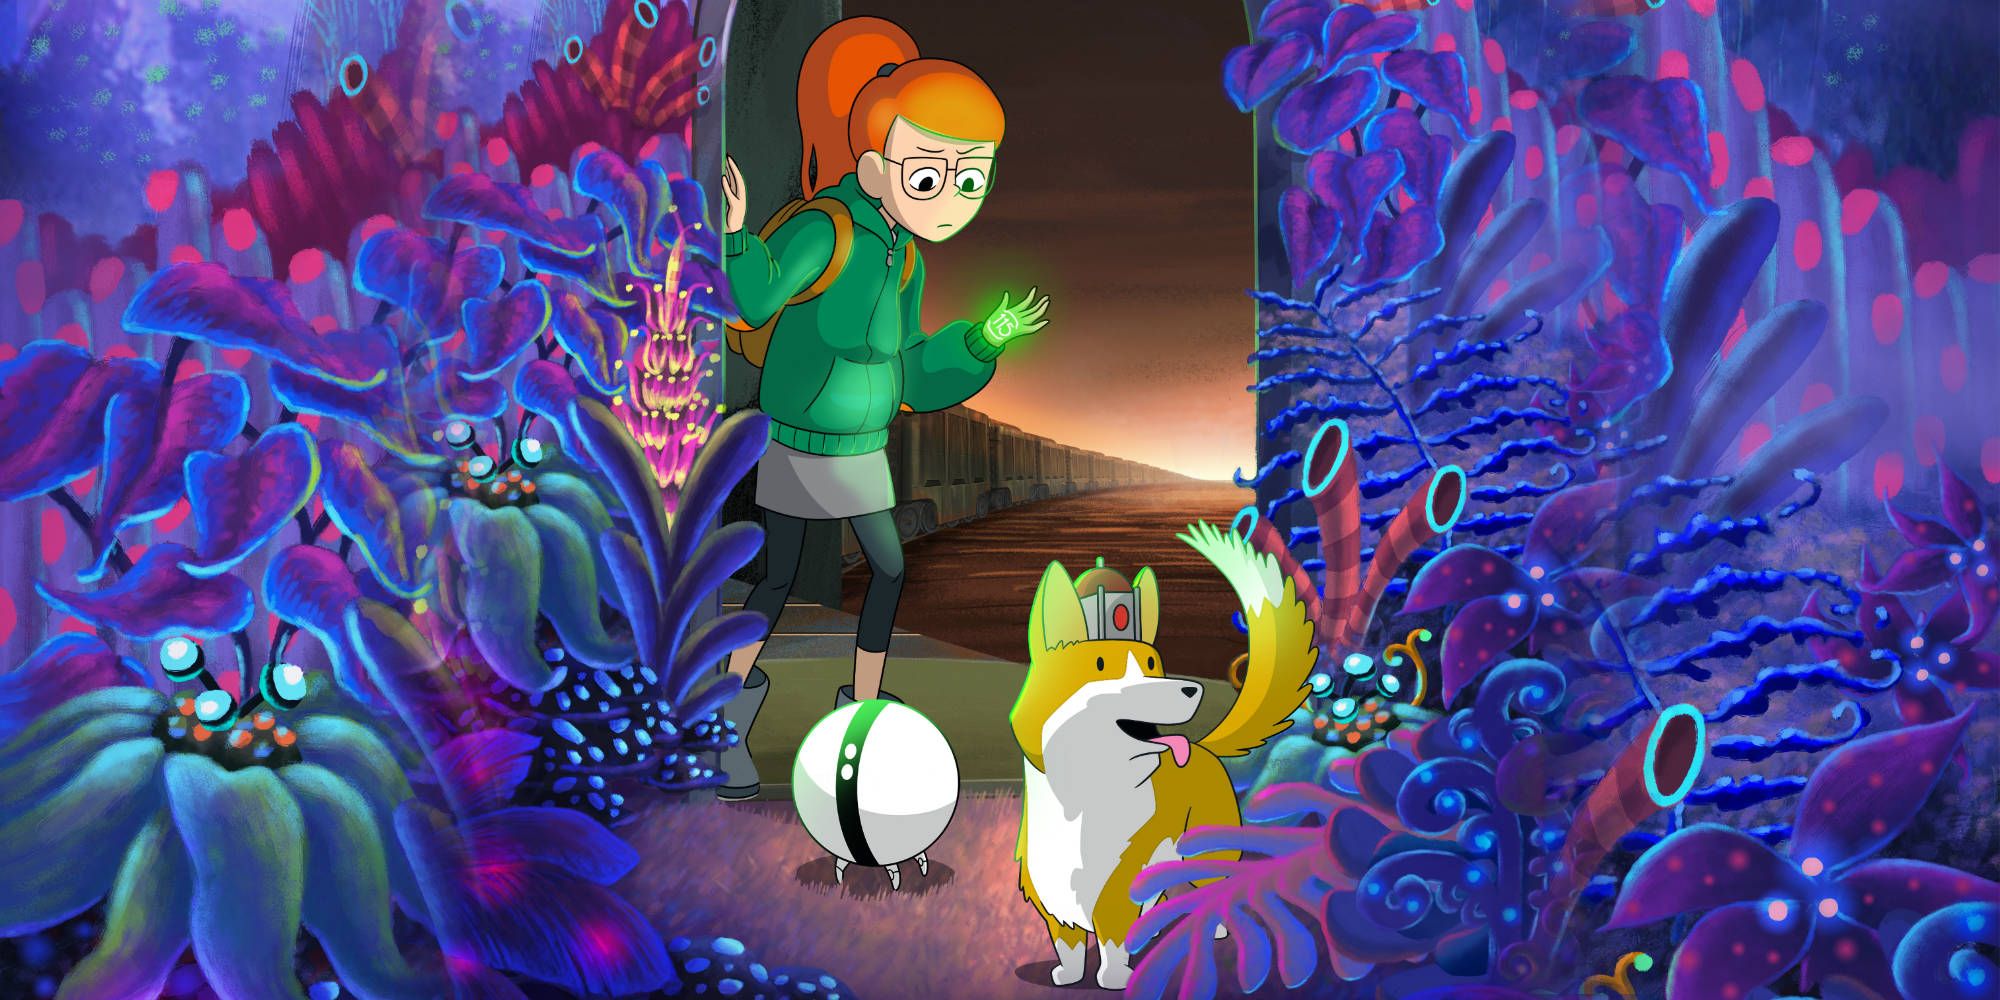 Infinity Train season 1 poster for five-night event on Cartoon Network